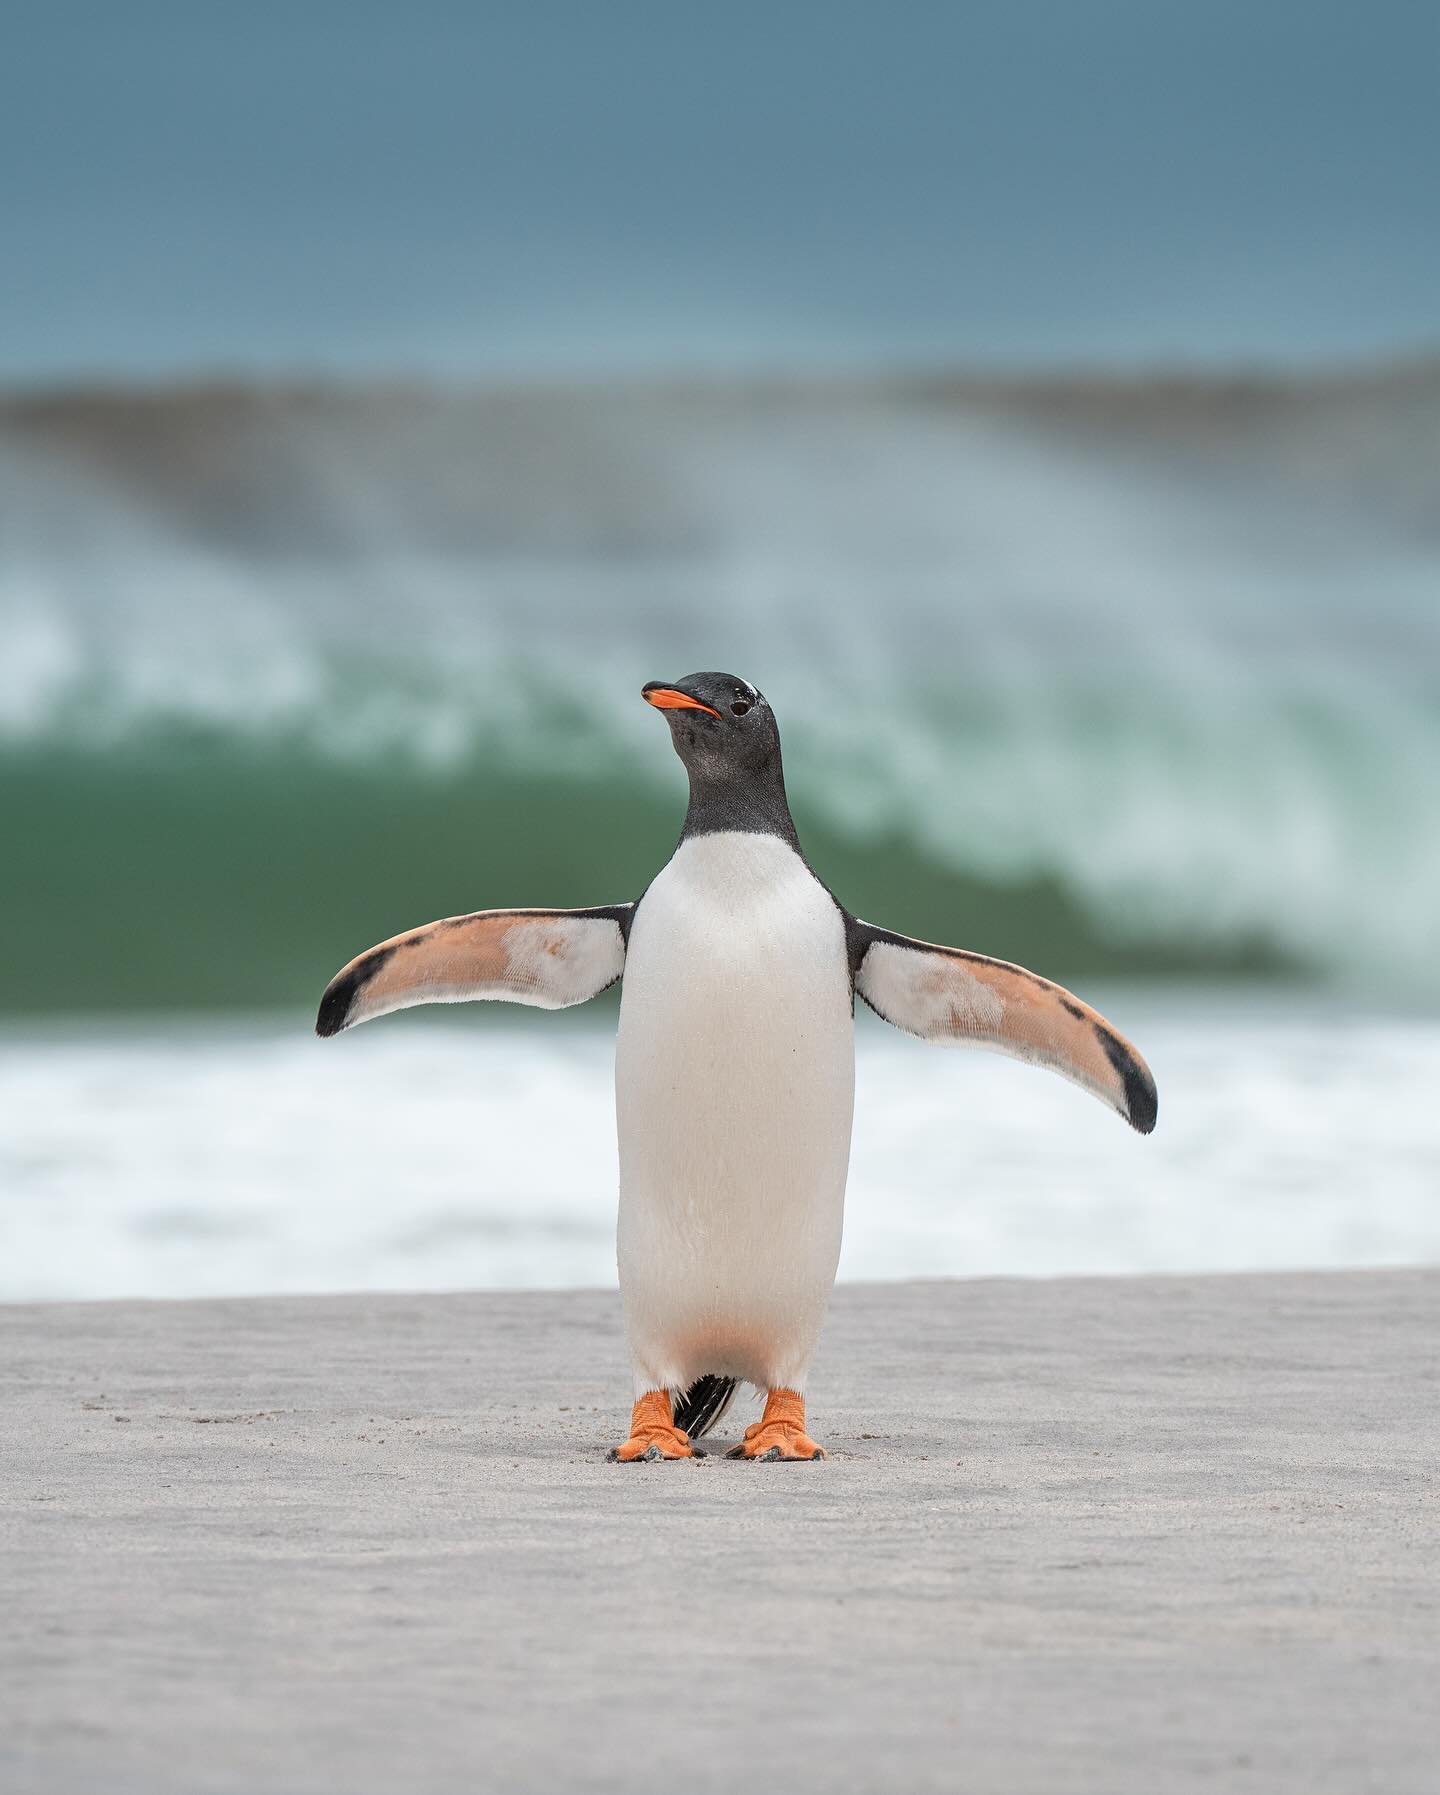 Surf&rsquo;s up, and so is my new YouTube video from my trip to the Falkland Islands. What a dream it was to witness and photograph so many penguins! 🐧 One of the most unique destinations I&rsquo;ve ever visited.⁣
⁣
@ilovethefalklands #hosted #pengu